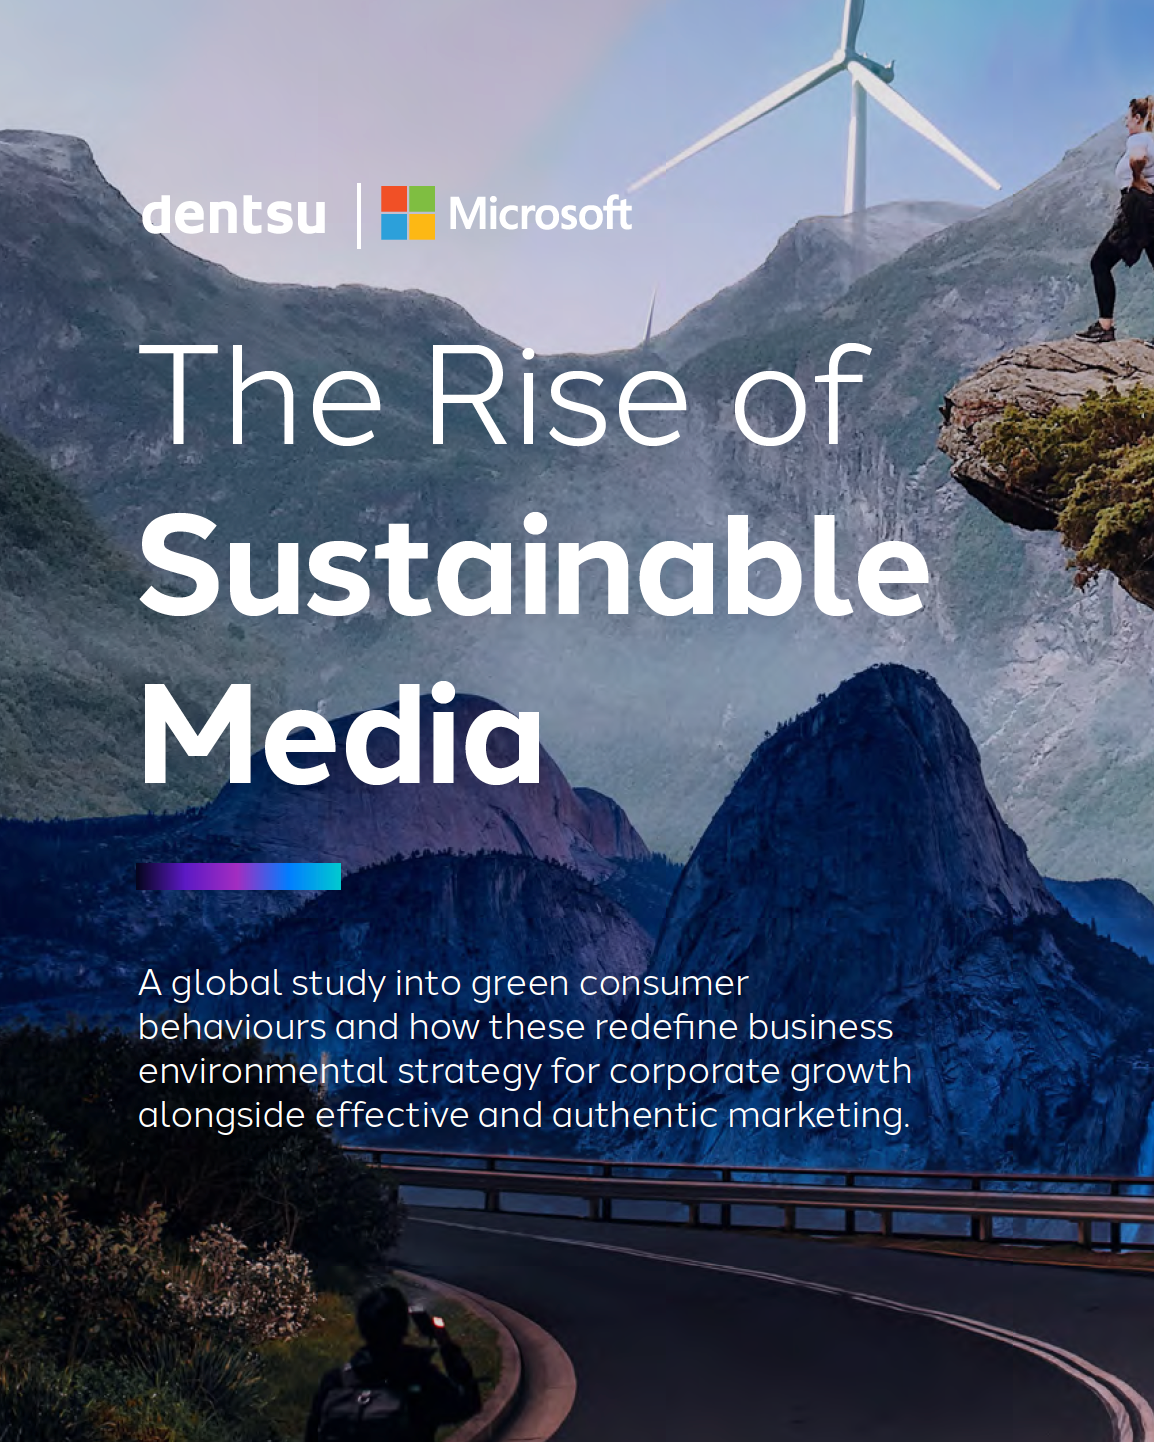 The Rise of Sustainable Media